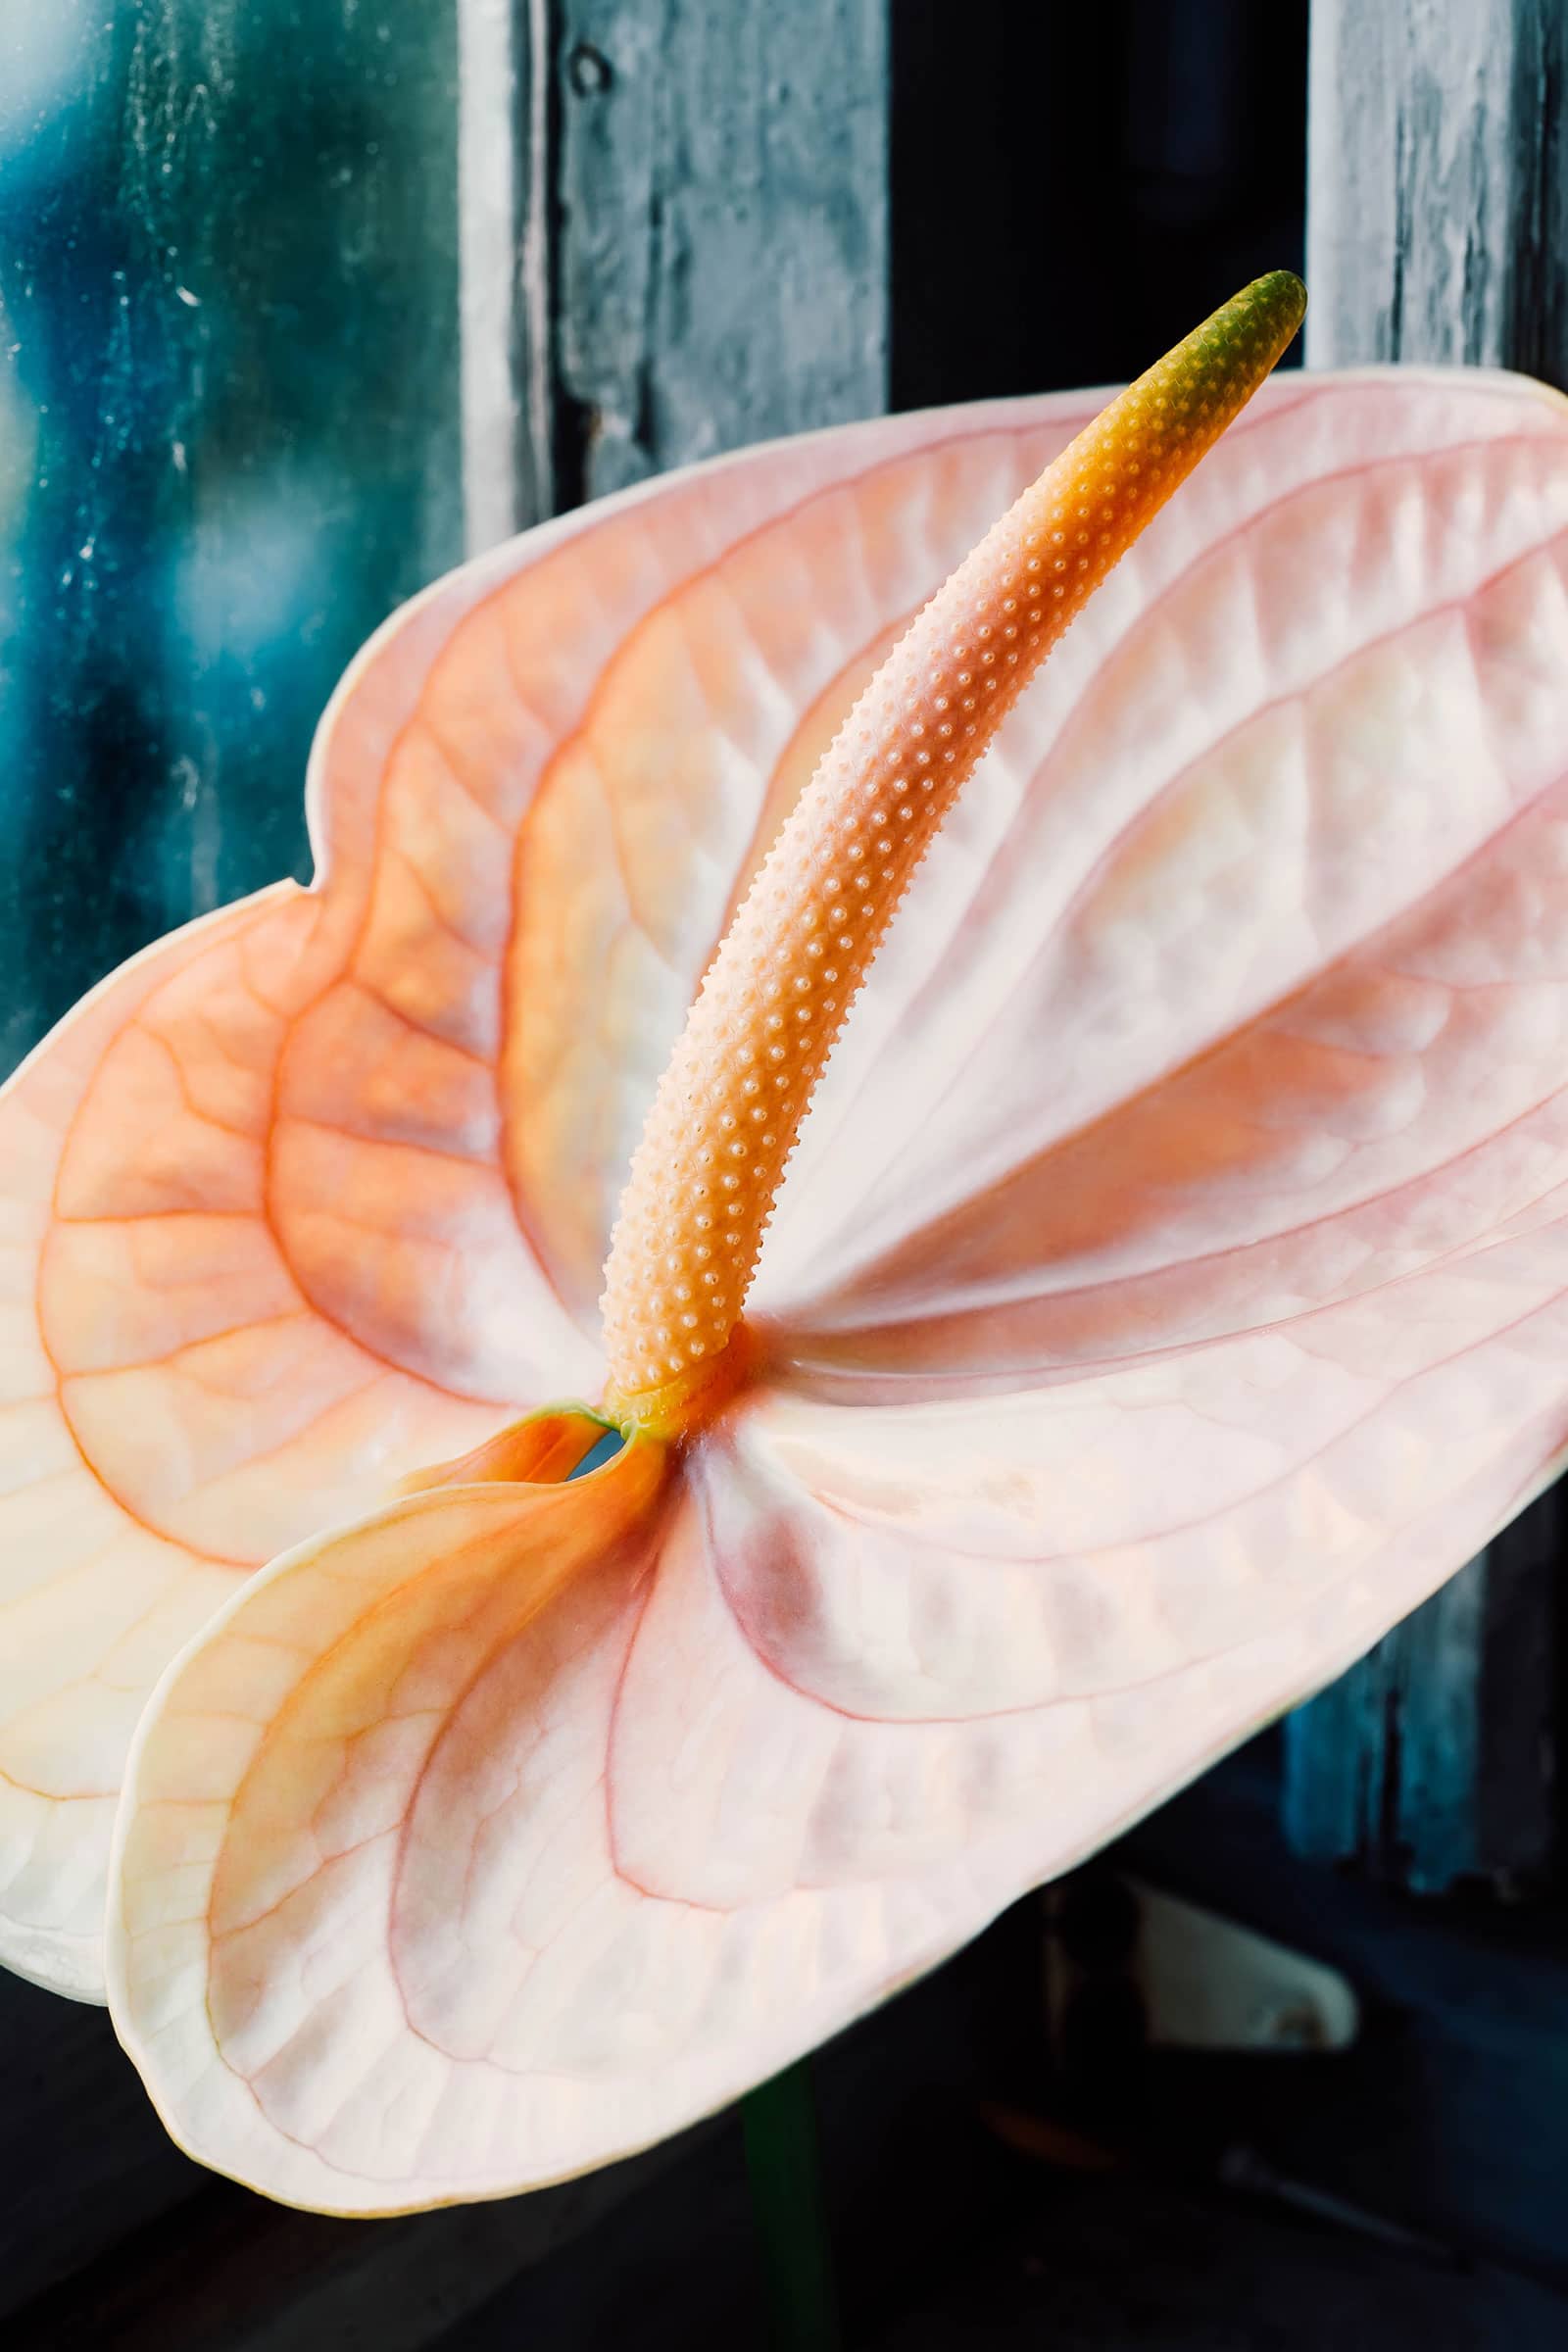 Anthurium care: complete guide to caring for flamingo flower